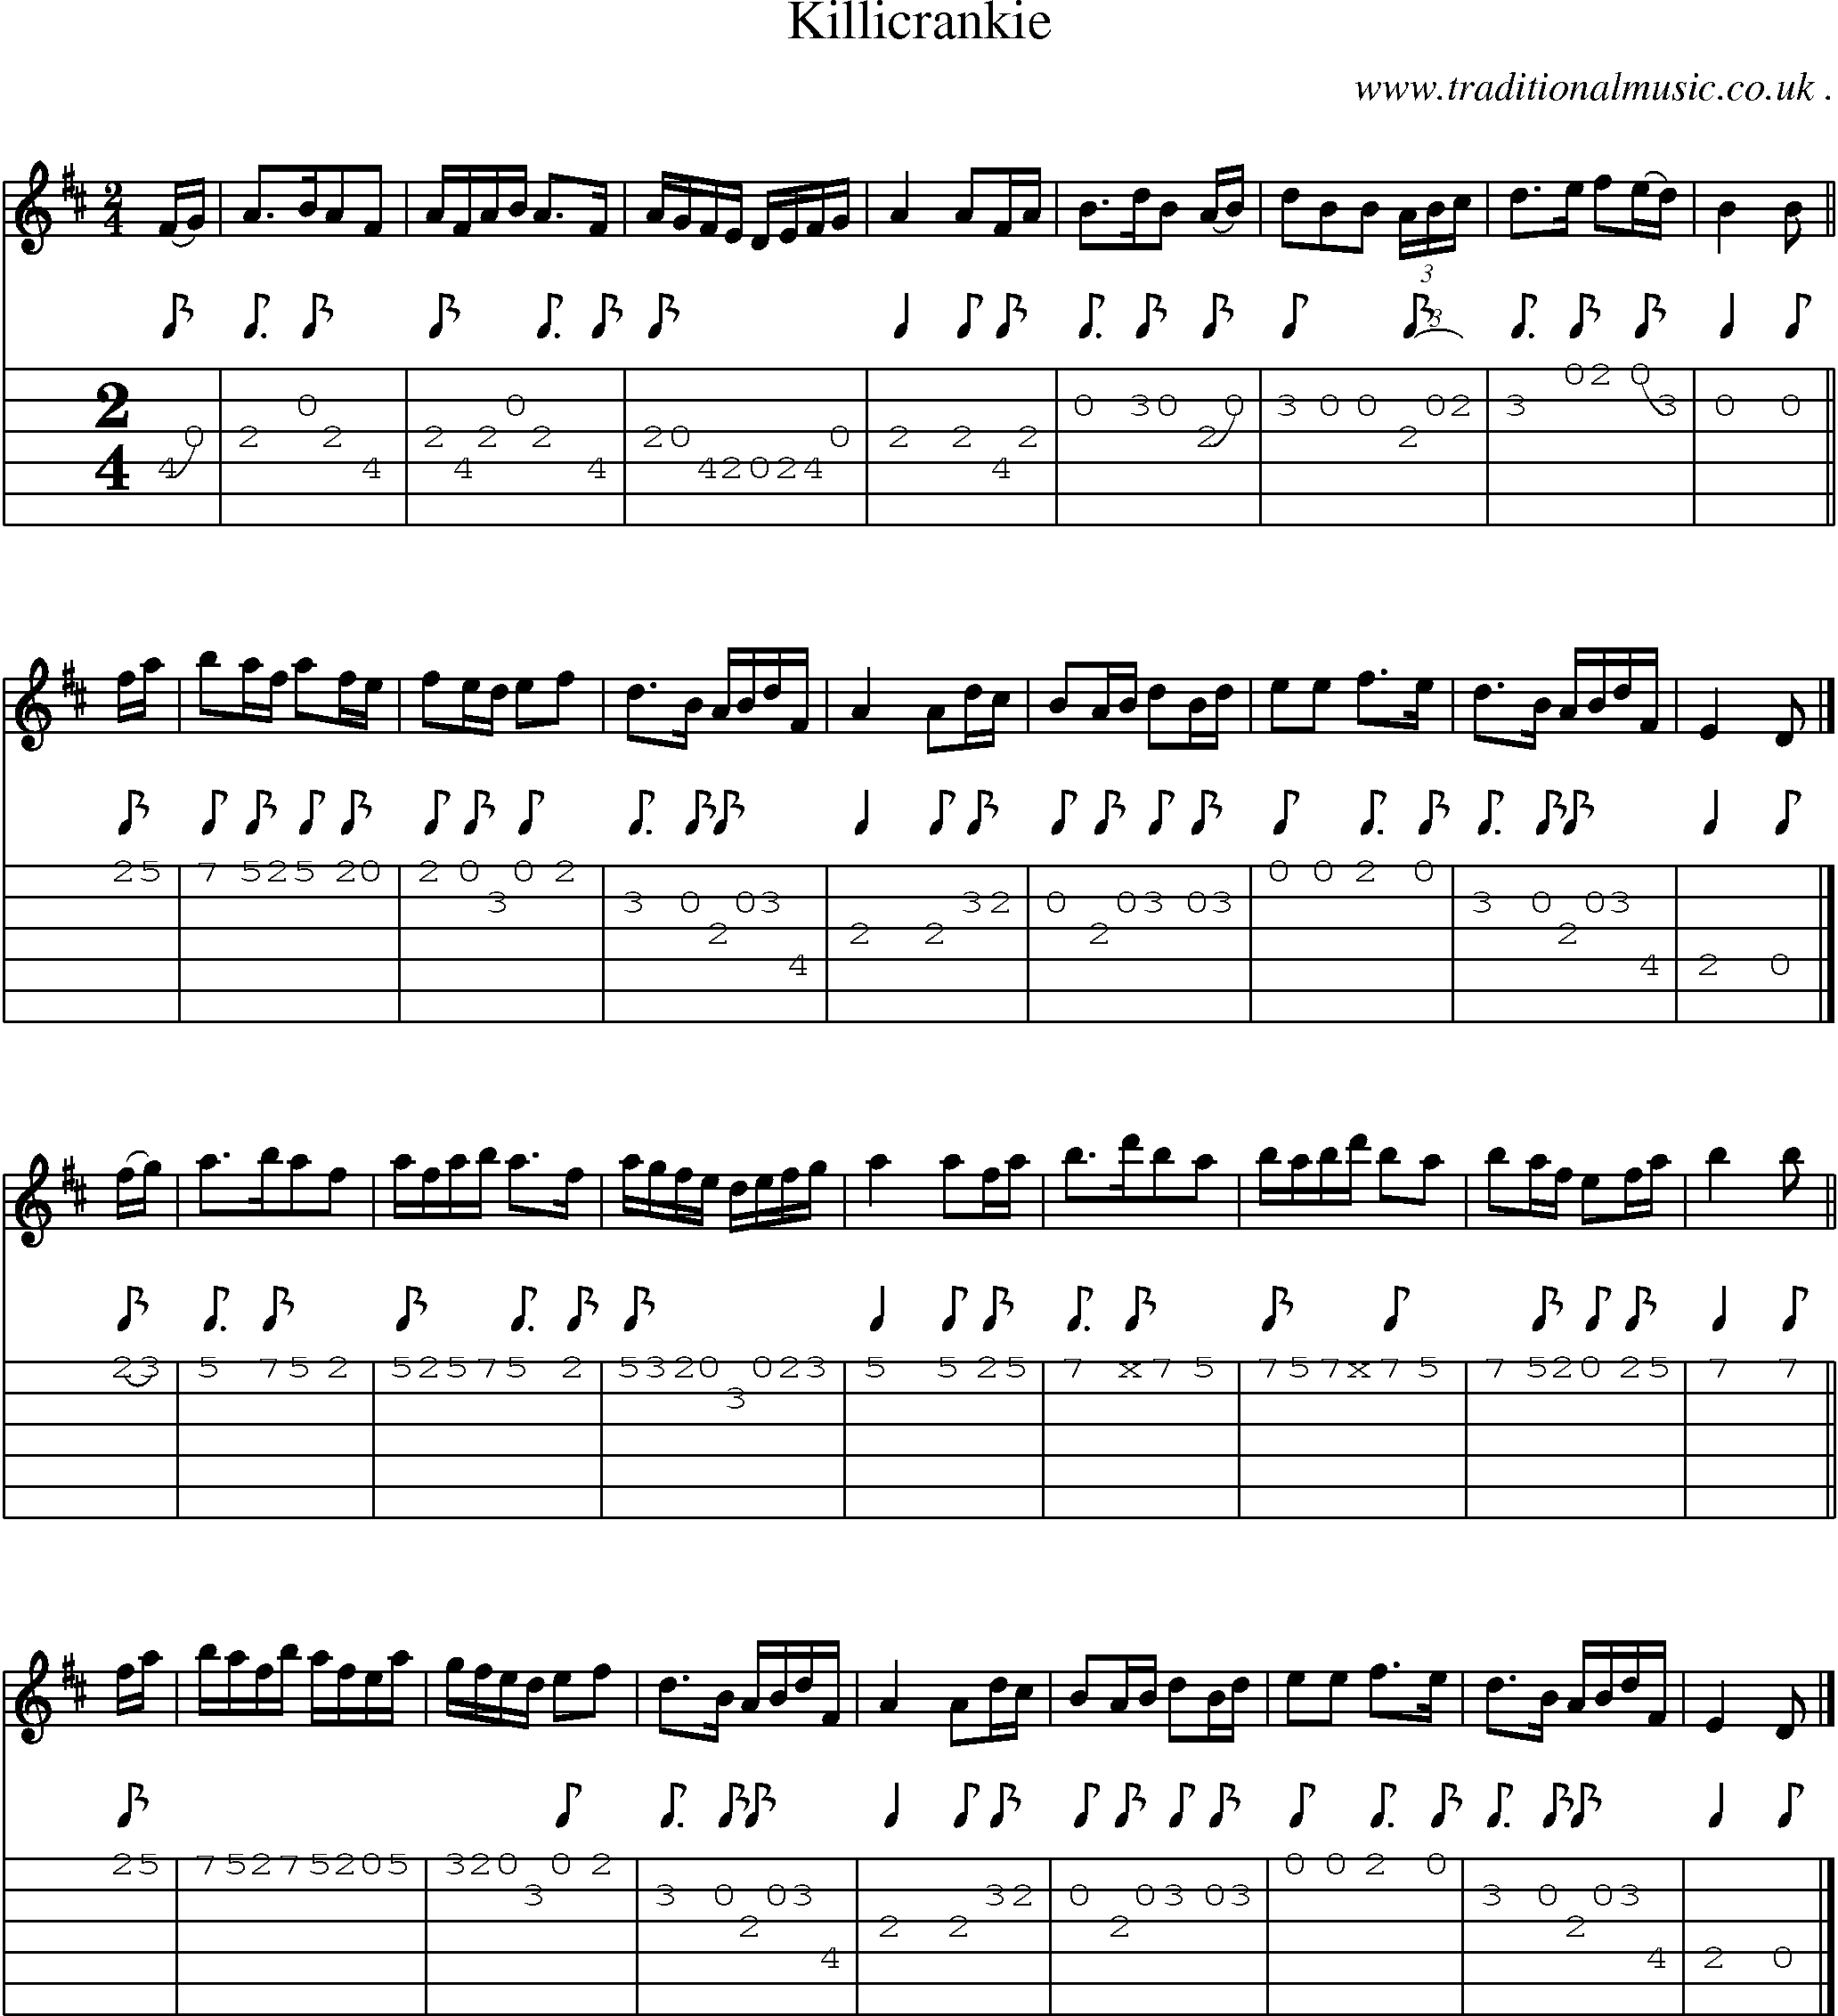 Sheet-music  score, Chords and Guitar Tabs for Killicrankie